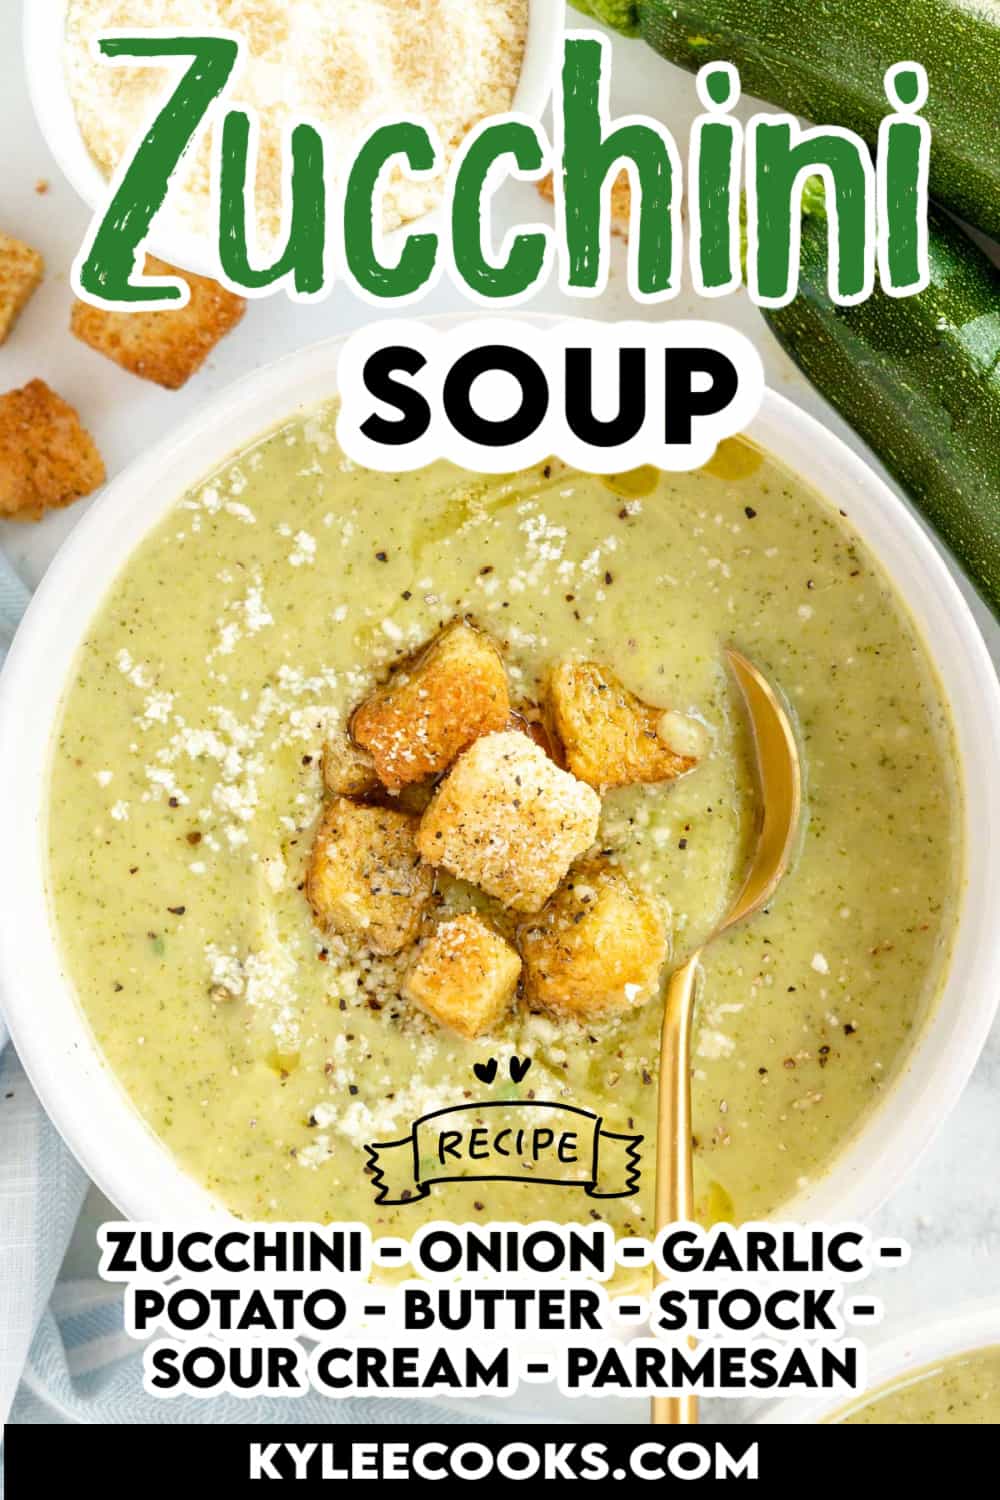 bowl of zucchini soup with "zucchini soup" and all the ingredients listed in a text overlay.